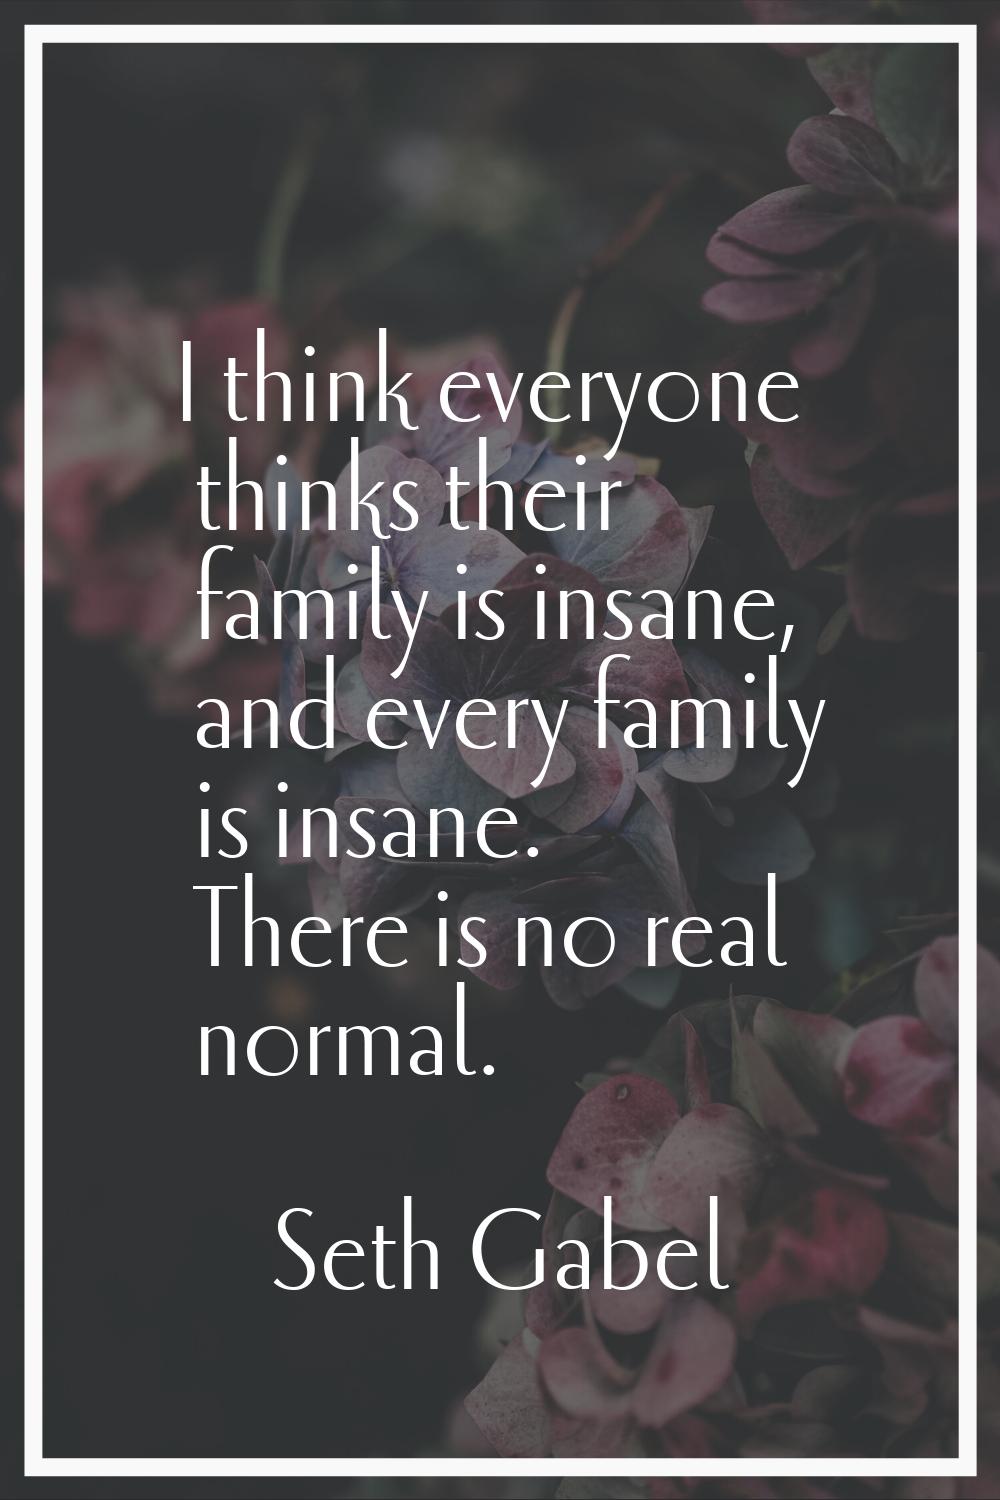 I think everyone thinks their family is insane, and every family is insane. There is no real normal